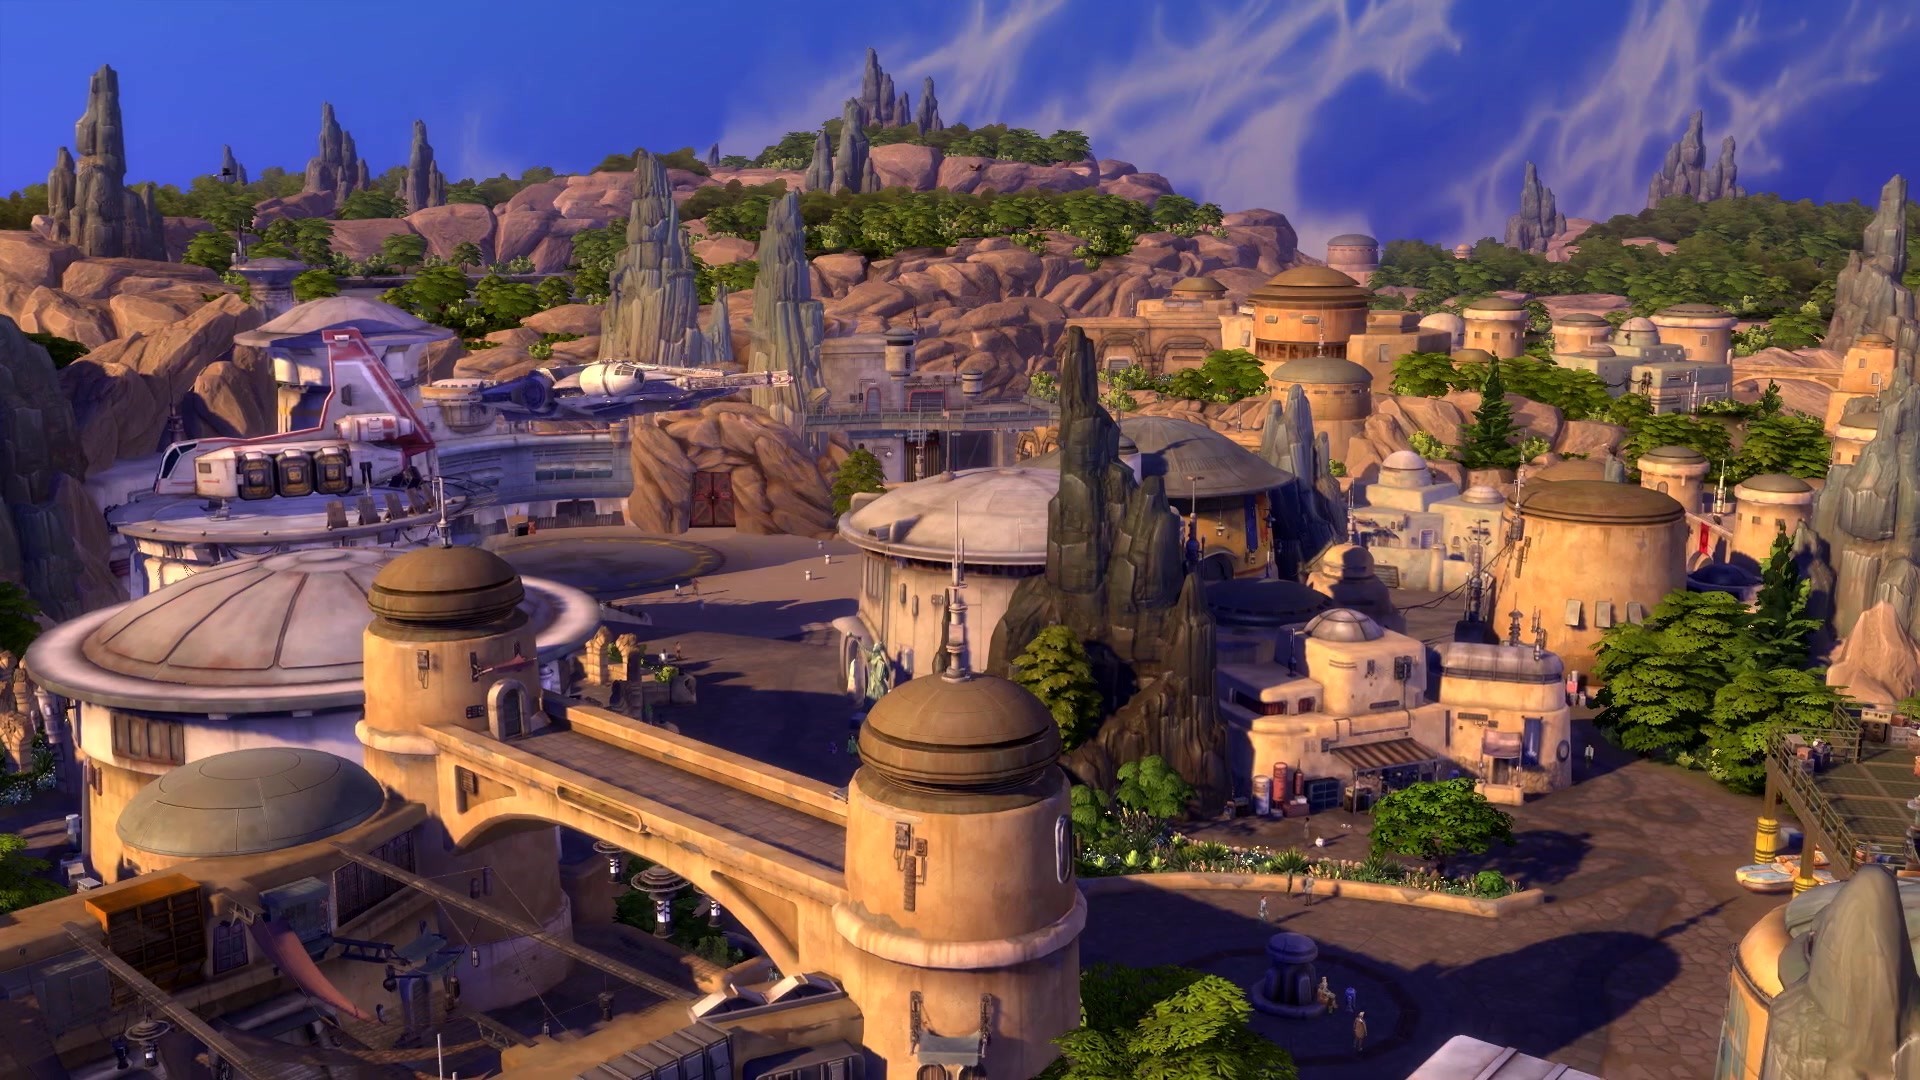 The Sims 4 Star Wars – Journey to Batuu: 85 Screens from the Trailer